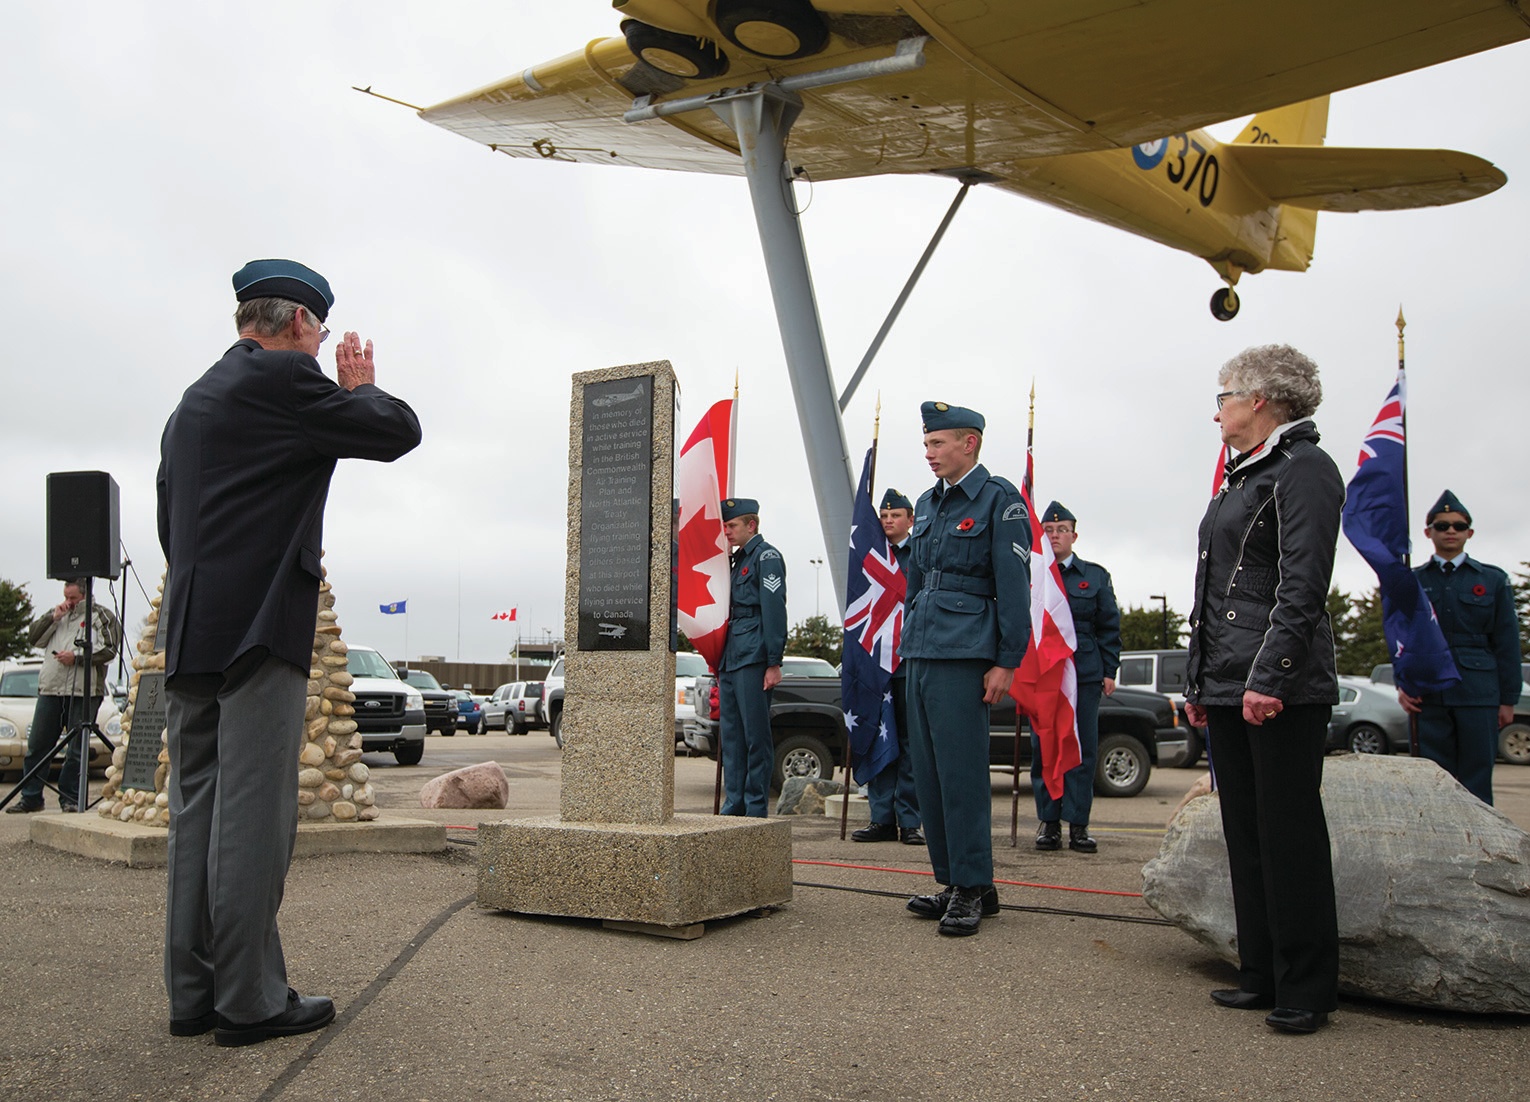 REMEMBERING - A new memorial was unveiled at the Red Deer Airport this past weekend. The memorial commemorated 44 soldiers from Canada